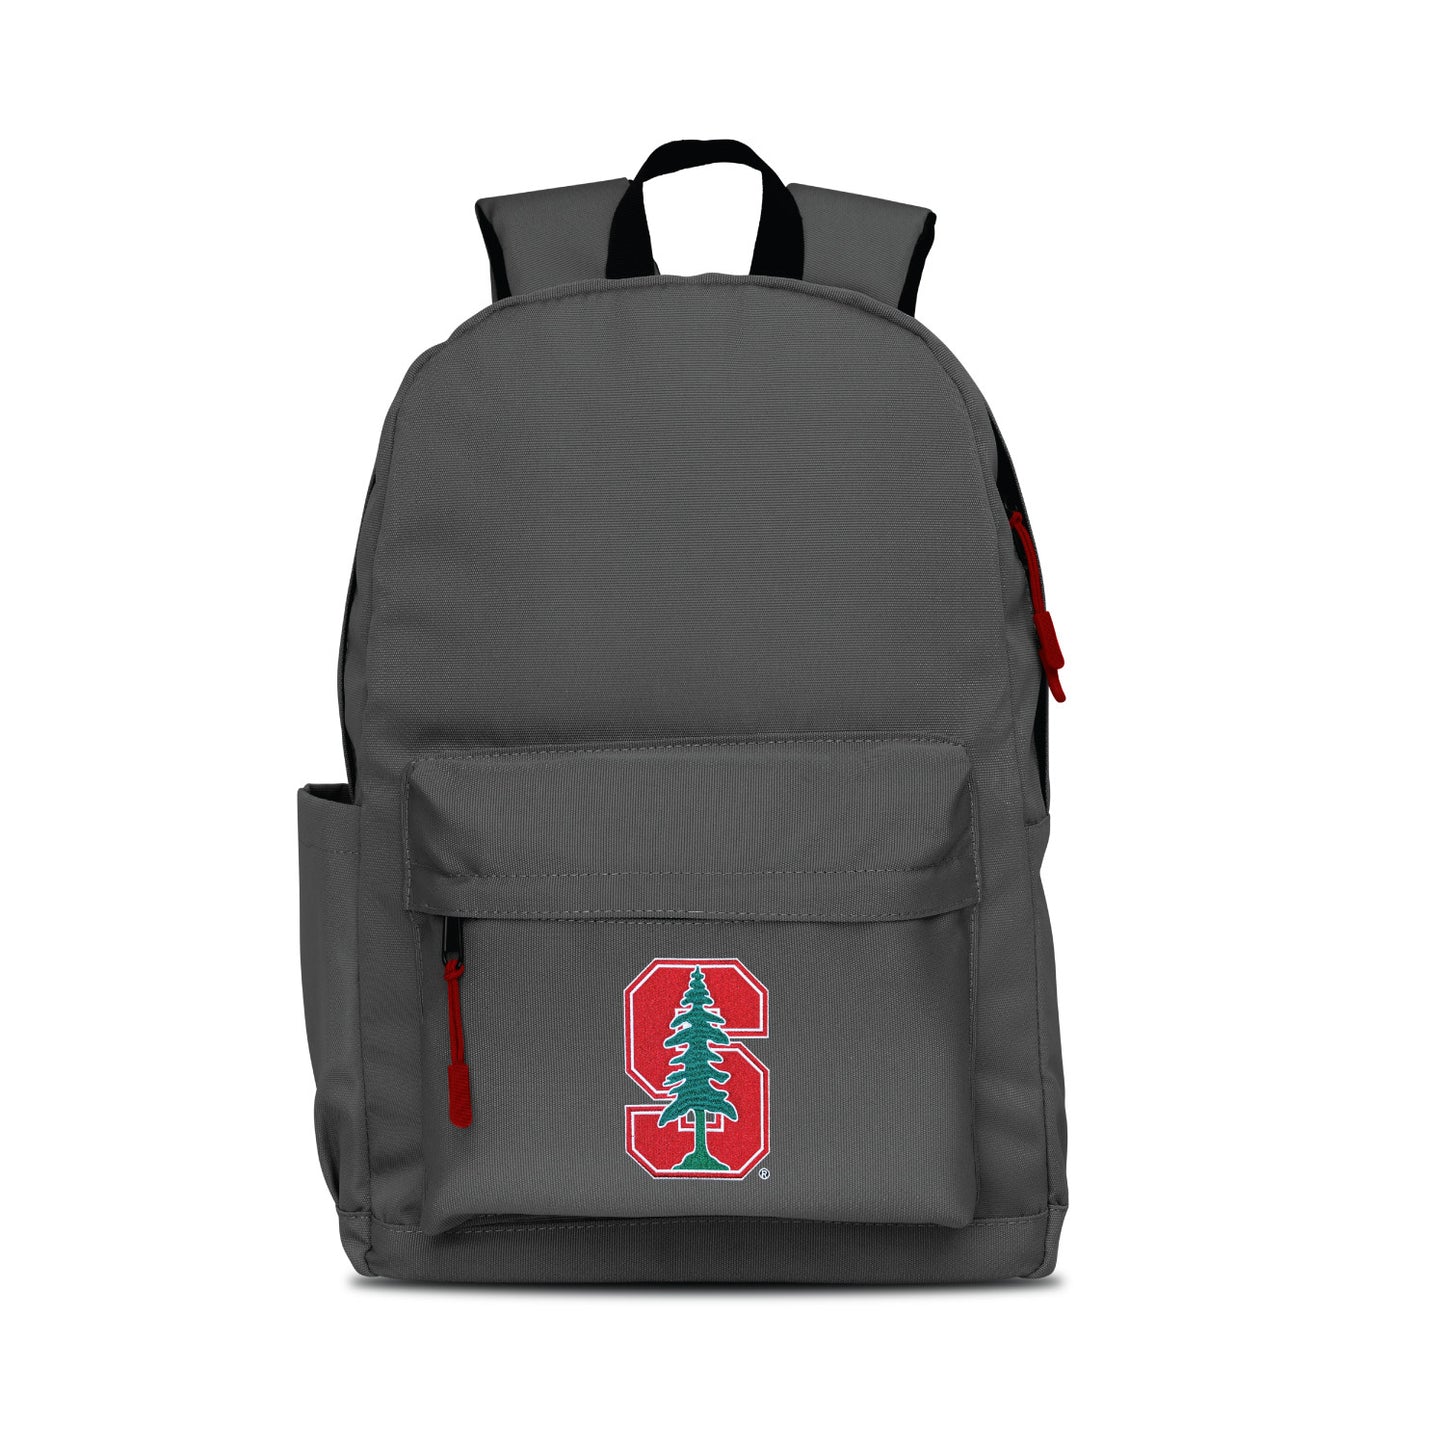 Stanford Cardinal Campus Laptop Backpack- Gray